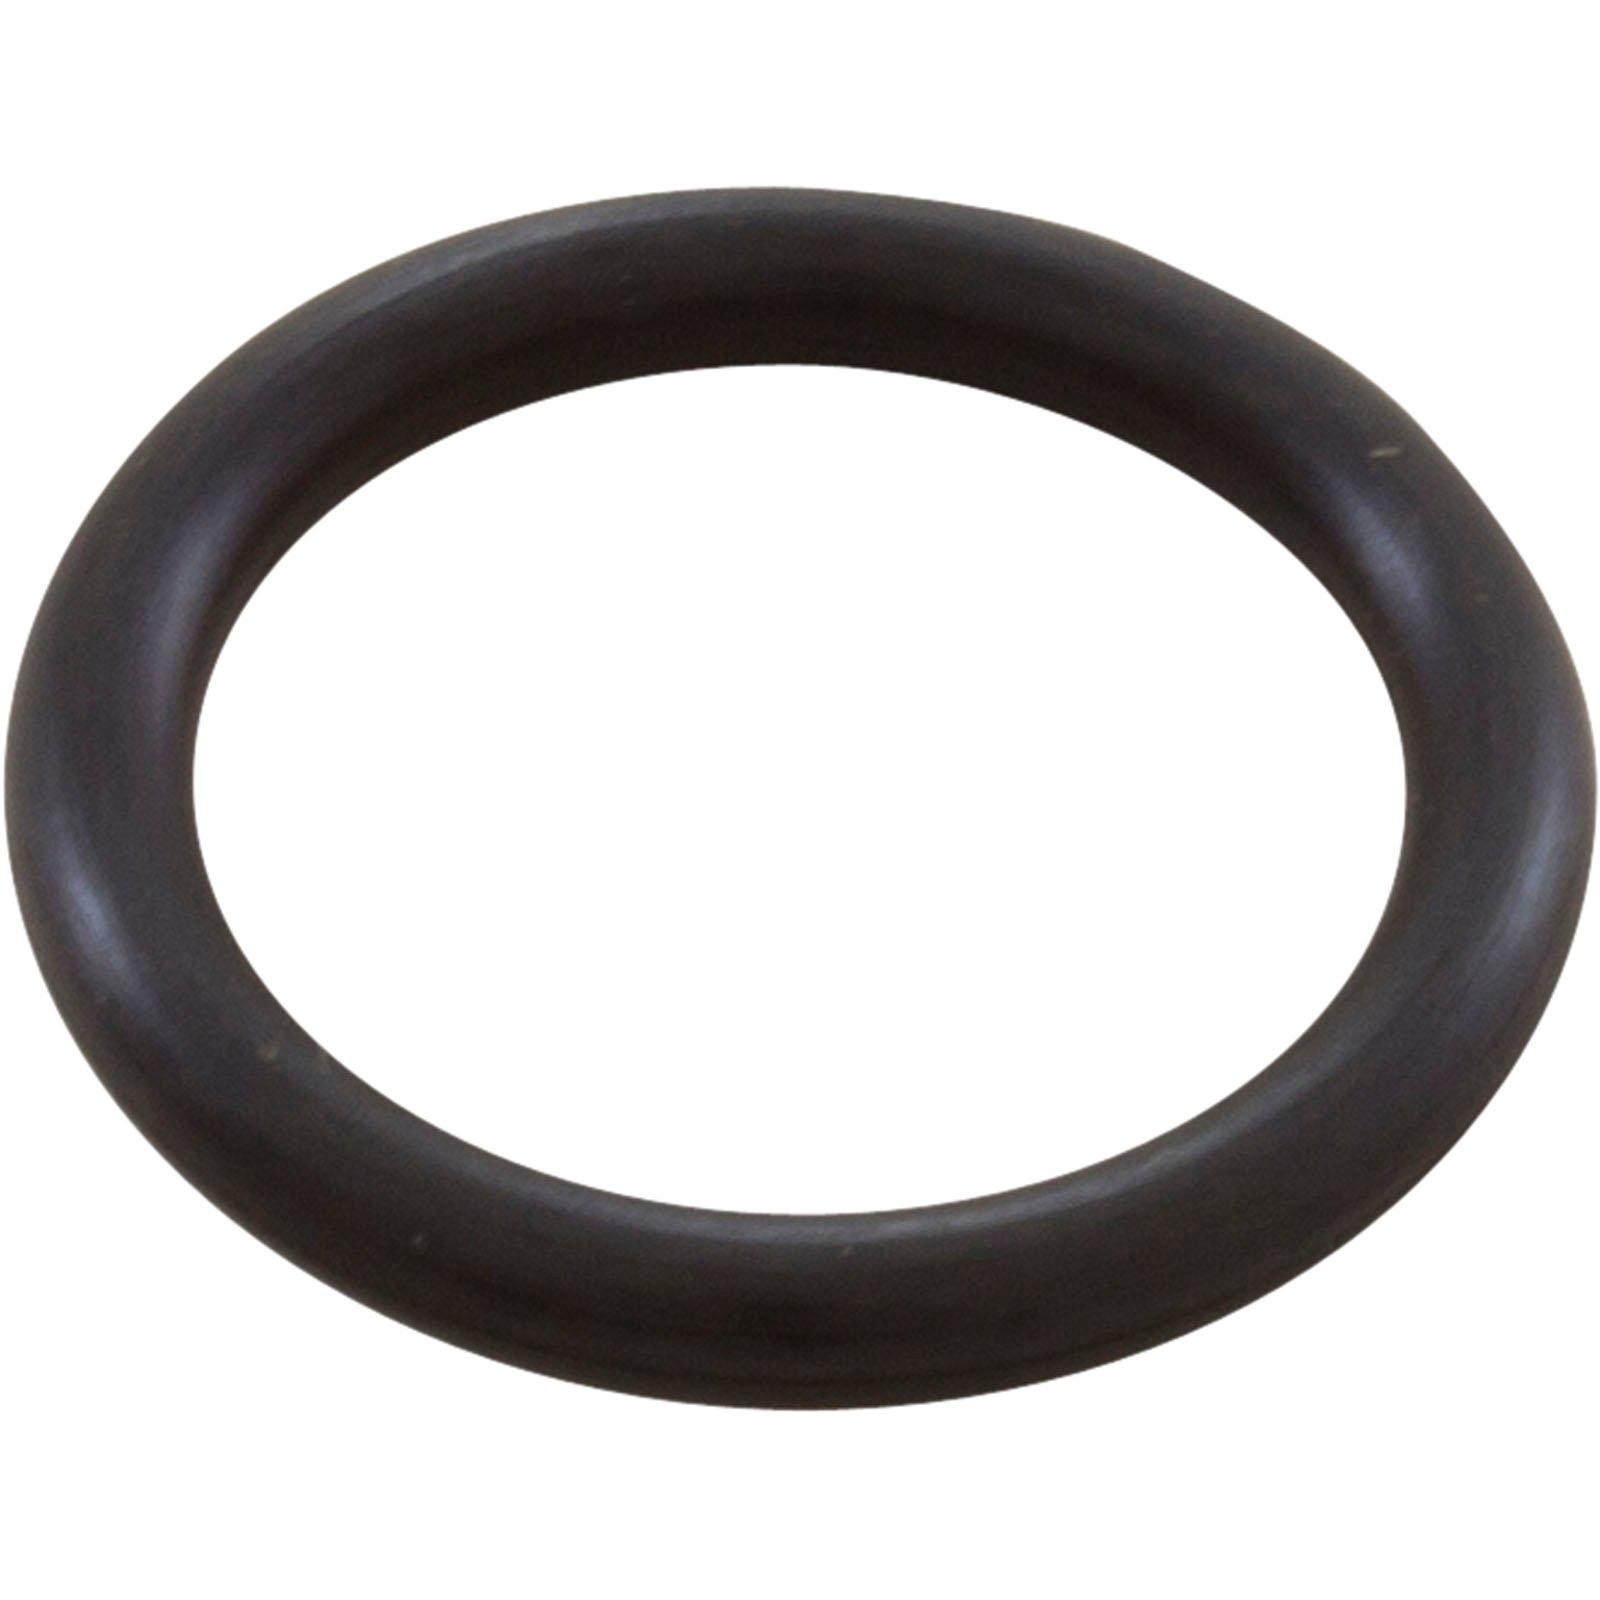 All Seals  Replacement Valve Stem O-Ring